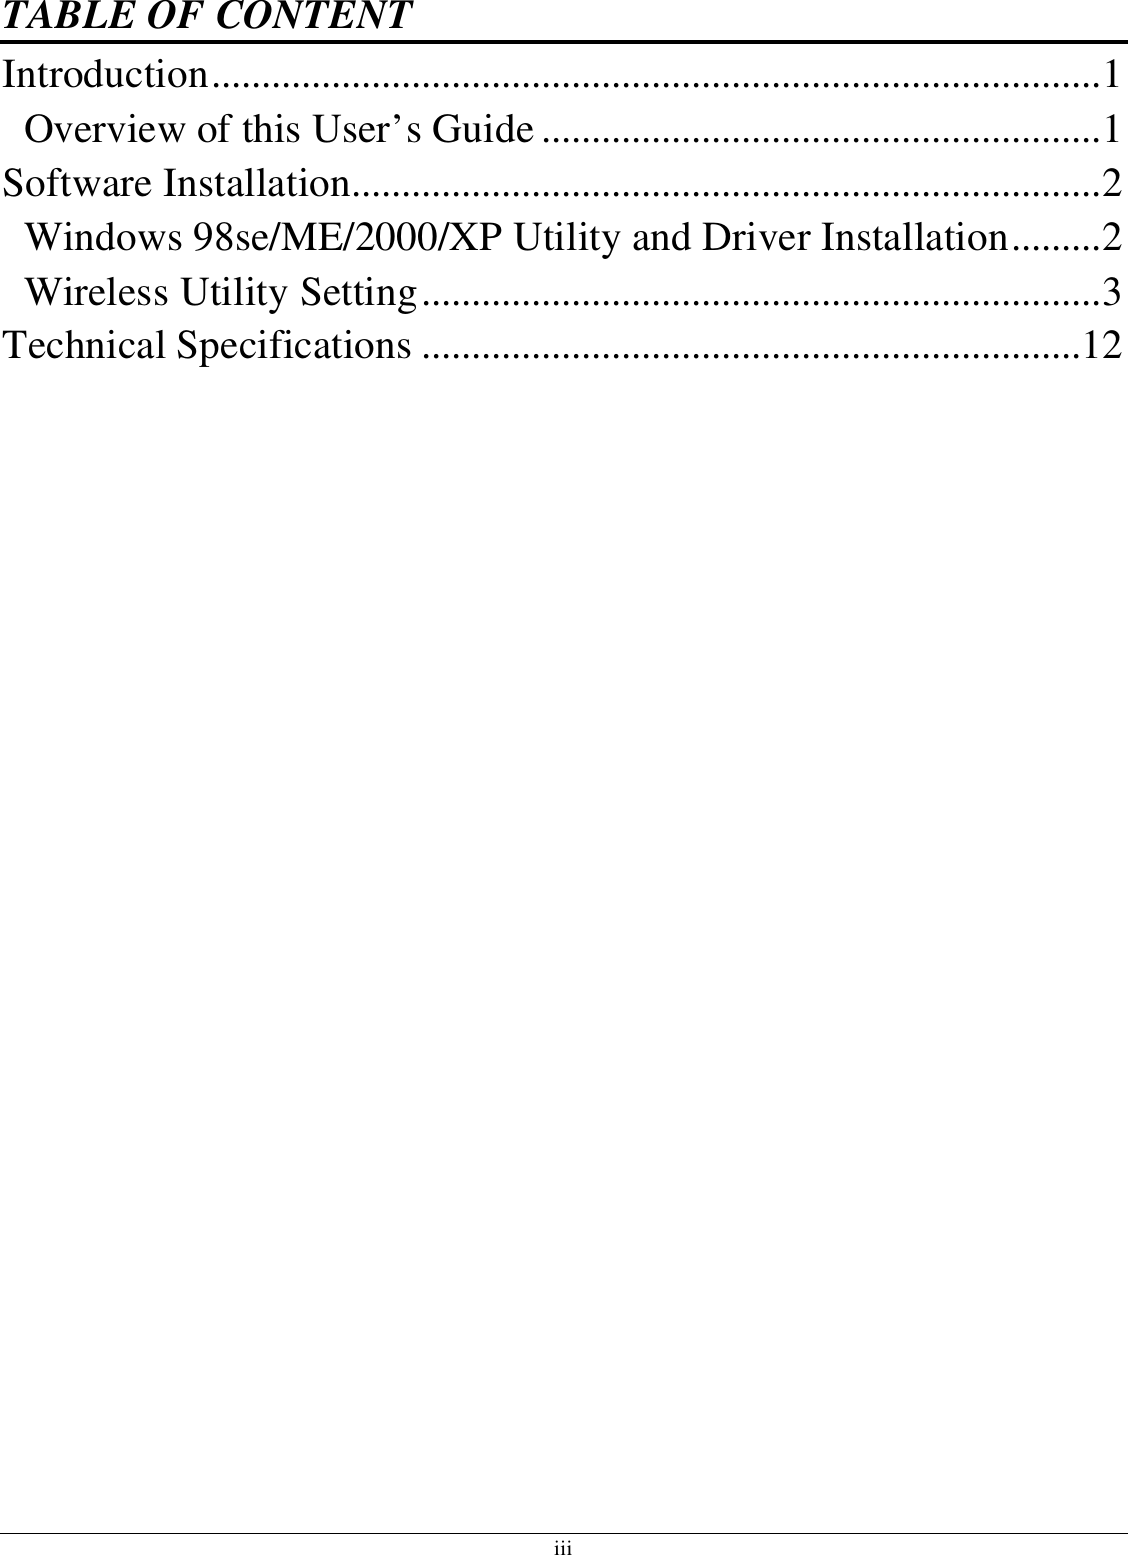 iii TABLE OF CONTENT Introduction.........................................................................................1 Overview of this User’s Guide ........................................................1 Software Installation...........................................................................2 Windows 98se/ME/2000/XP Utility and Driver Installation.........2 Wireless Utility Setting....................................................................3 Technical Specifications ..................................................................12  